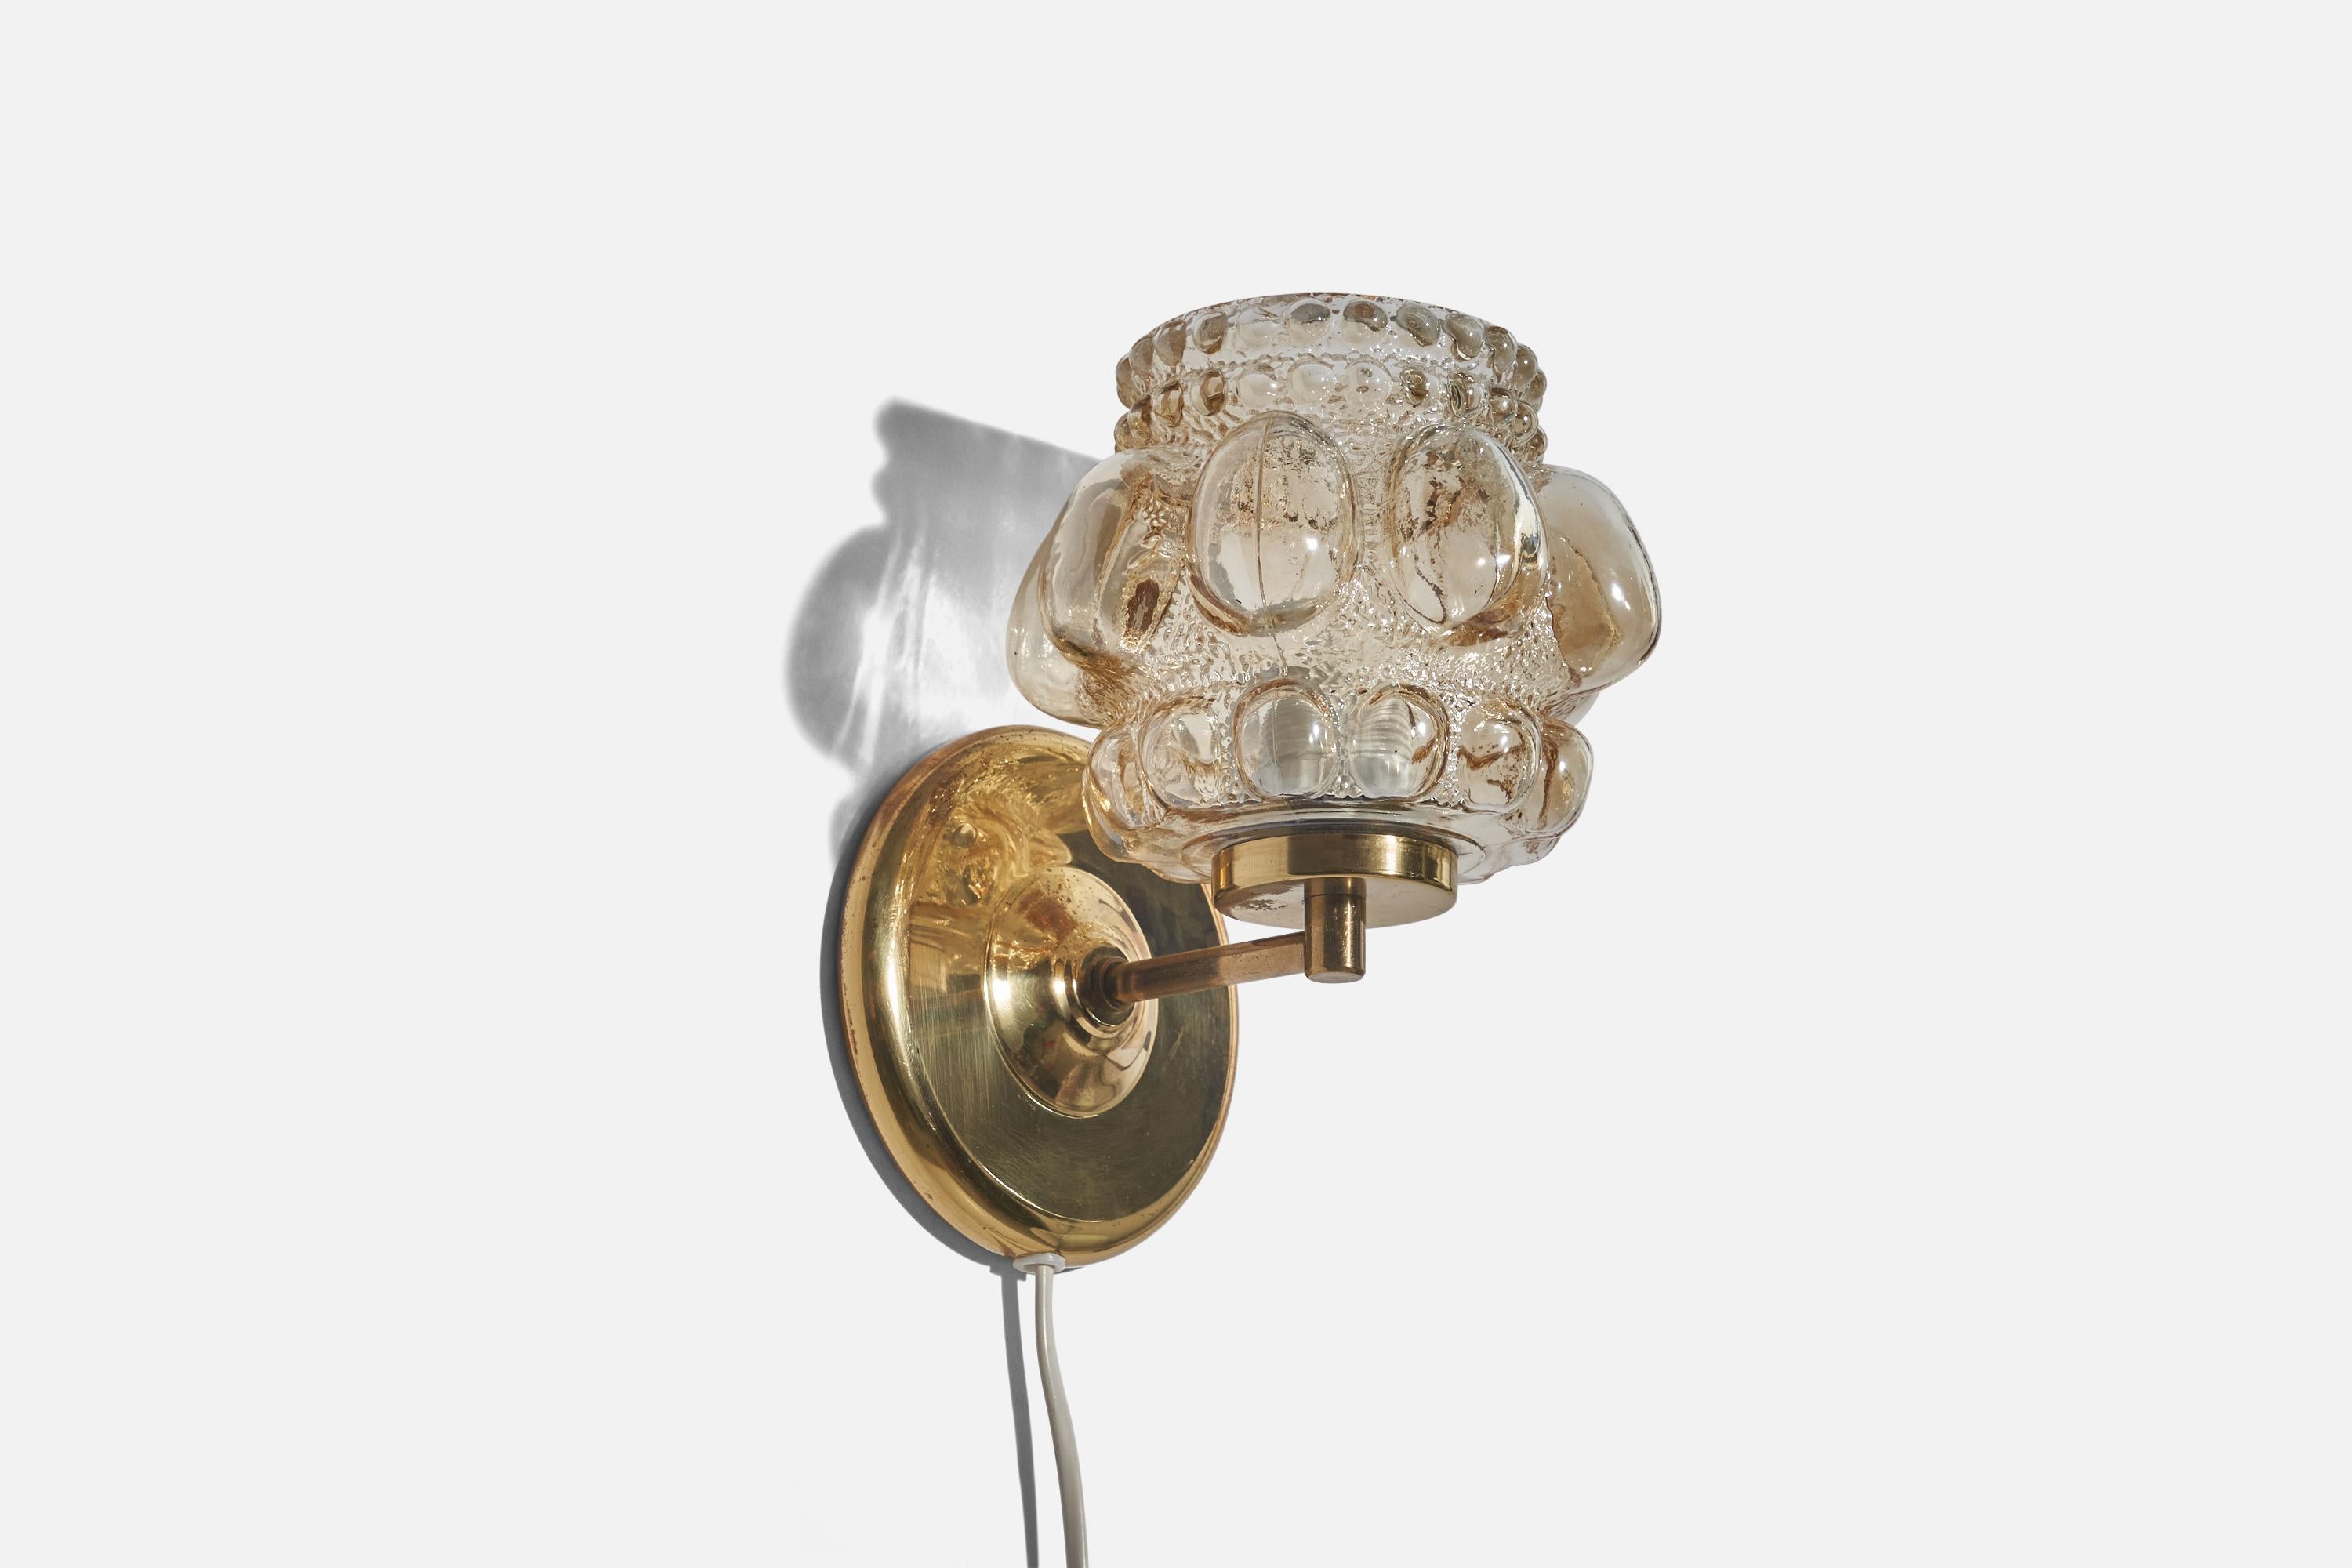 A glass and brass sconce/ wall light designed by Helena Tynell and produced by Glashütte Limburg, Germany, 1960s.

Dimensions of back plate (inches) : 5.11 x 5.11 x 0.70 (height x width x depth).

Socket takes standard E-26 medium base